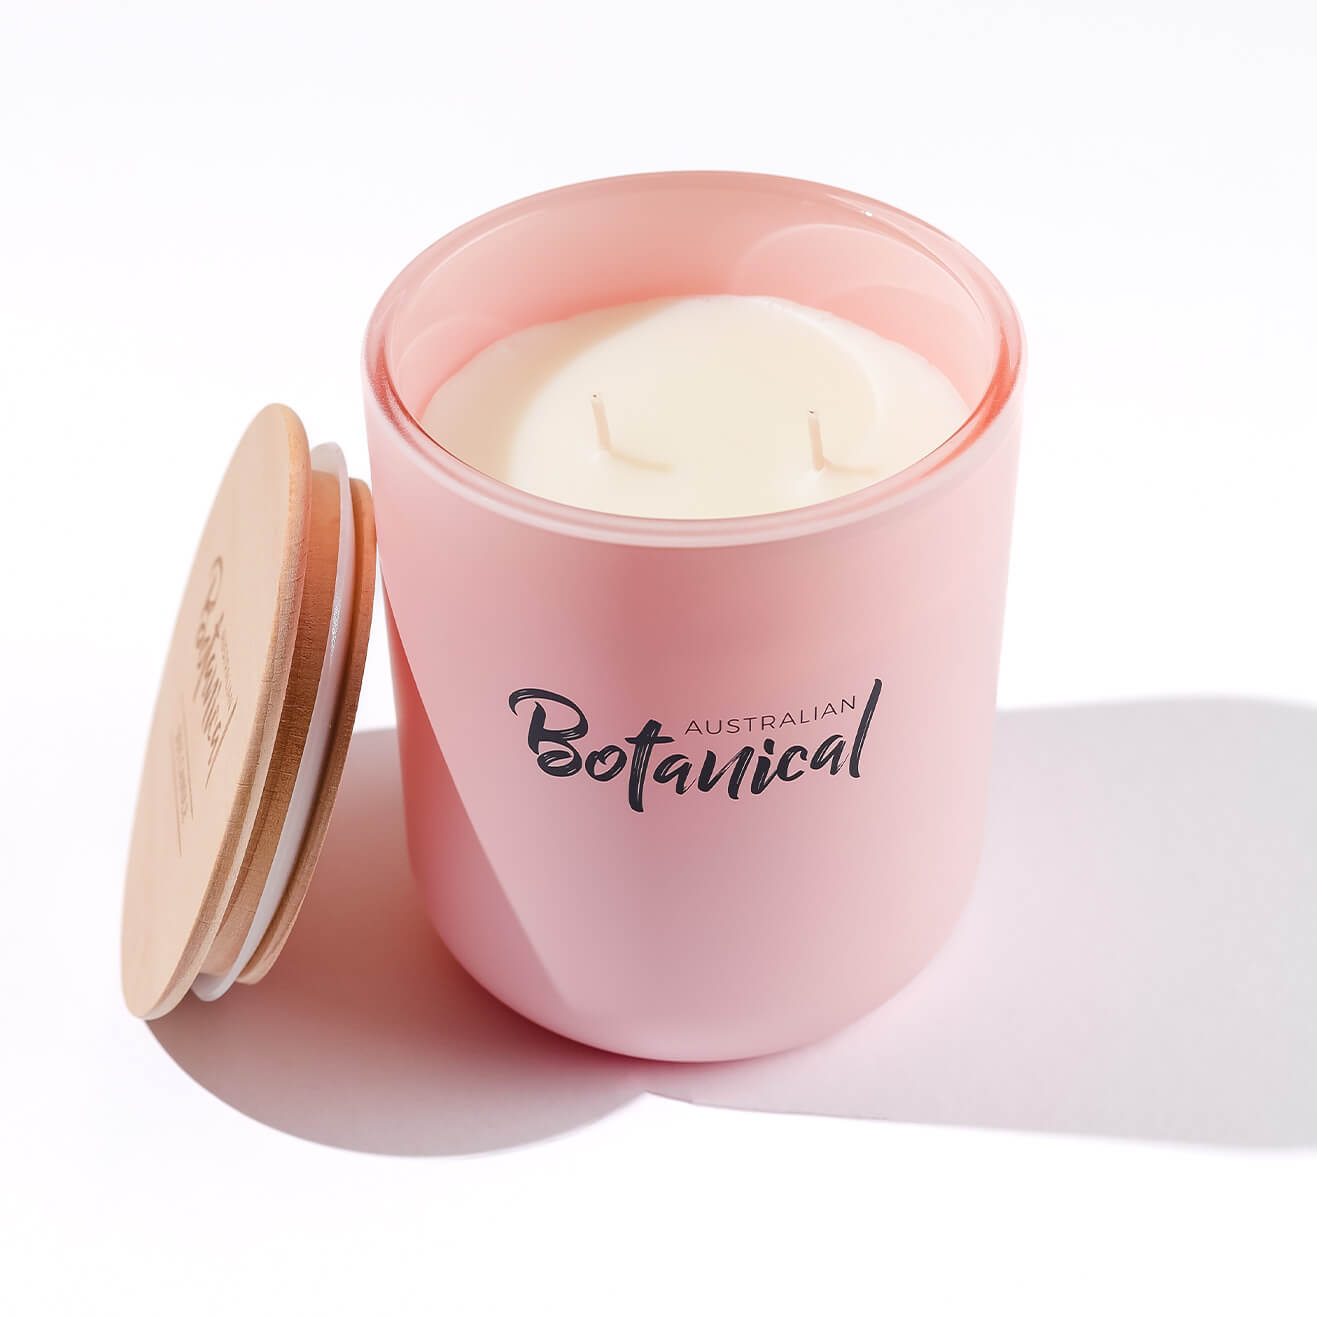 Peony Rose Scented Soy Candle inside